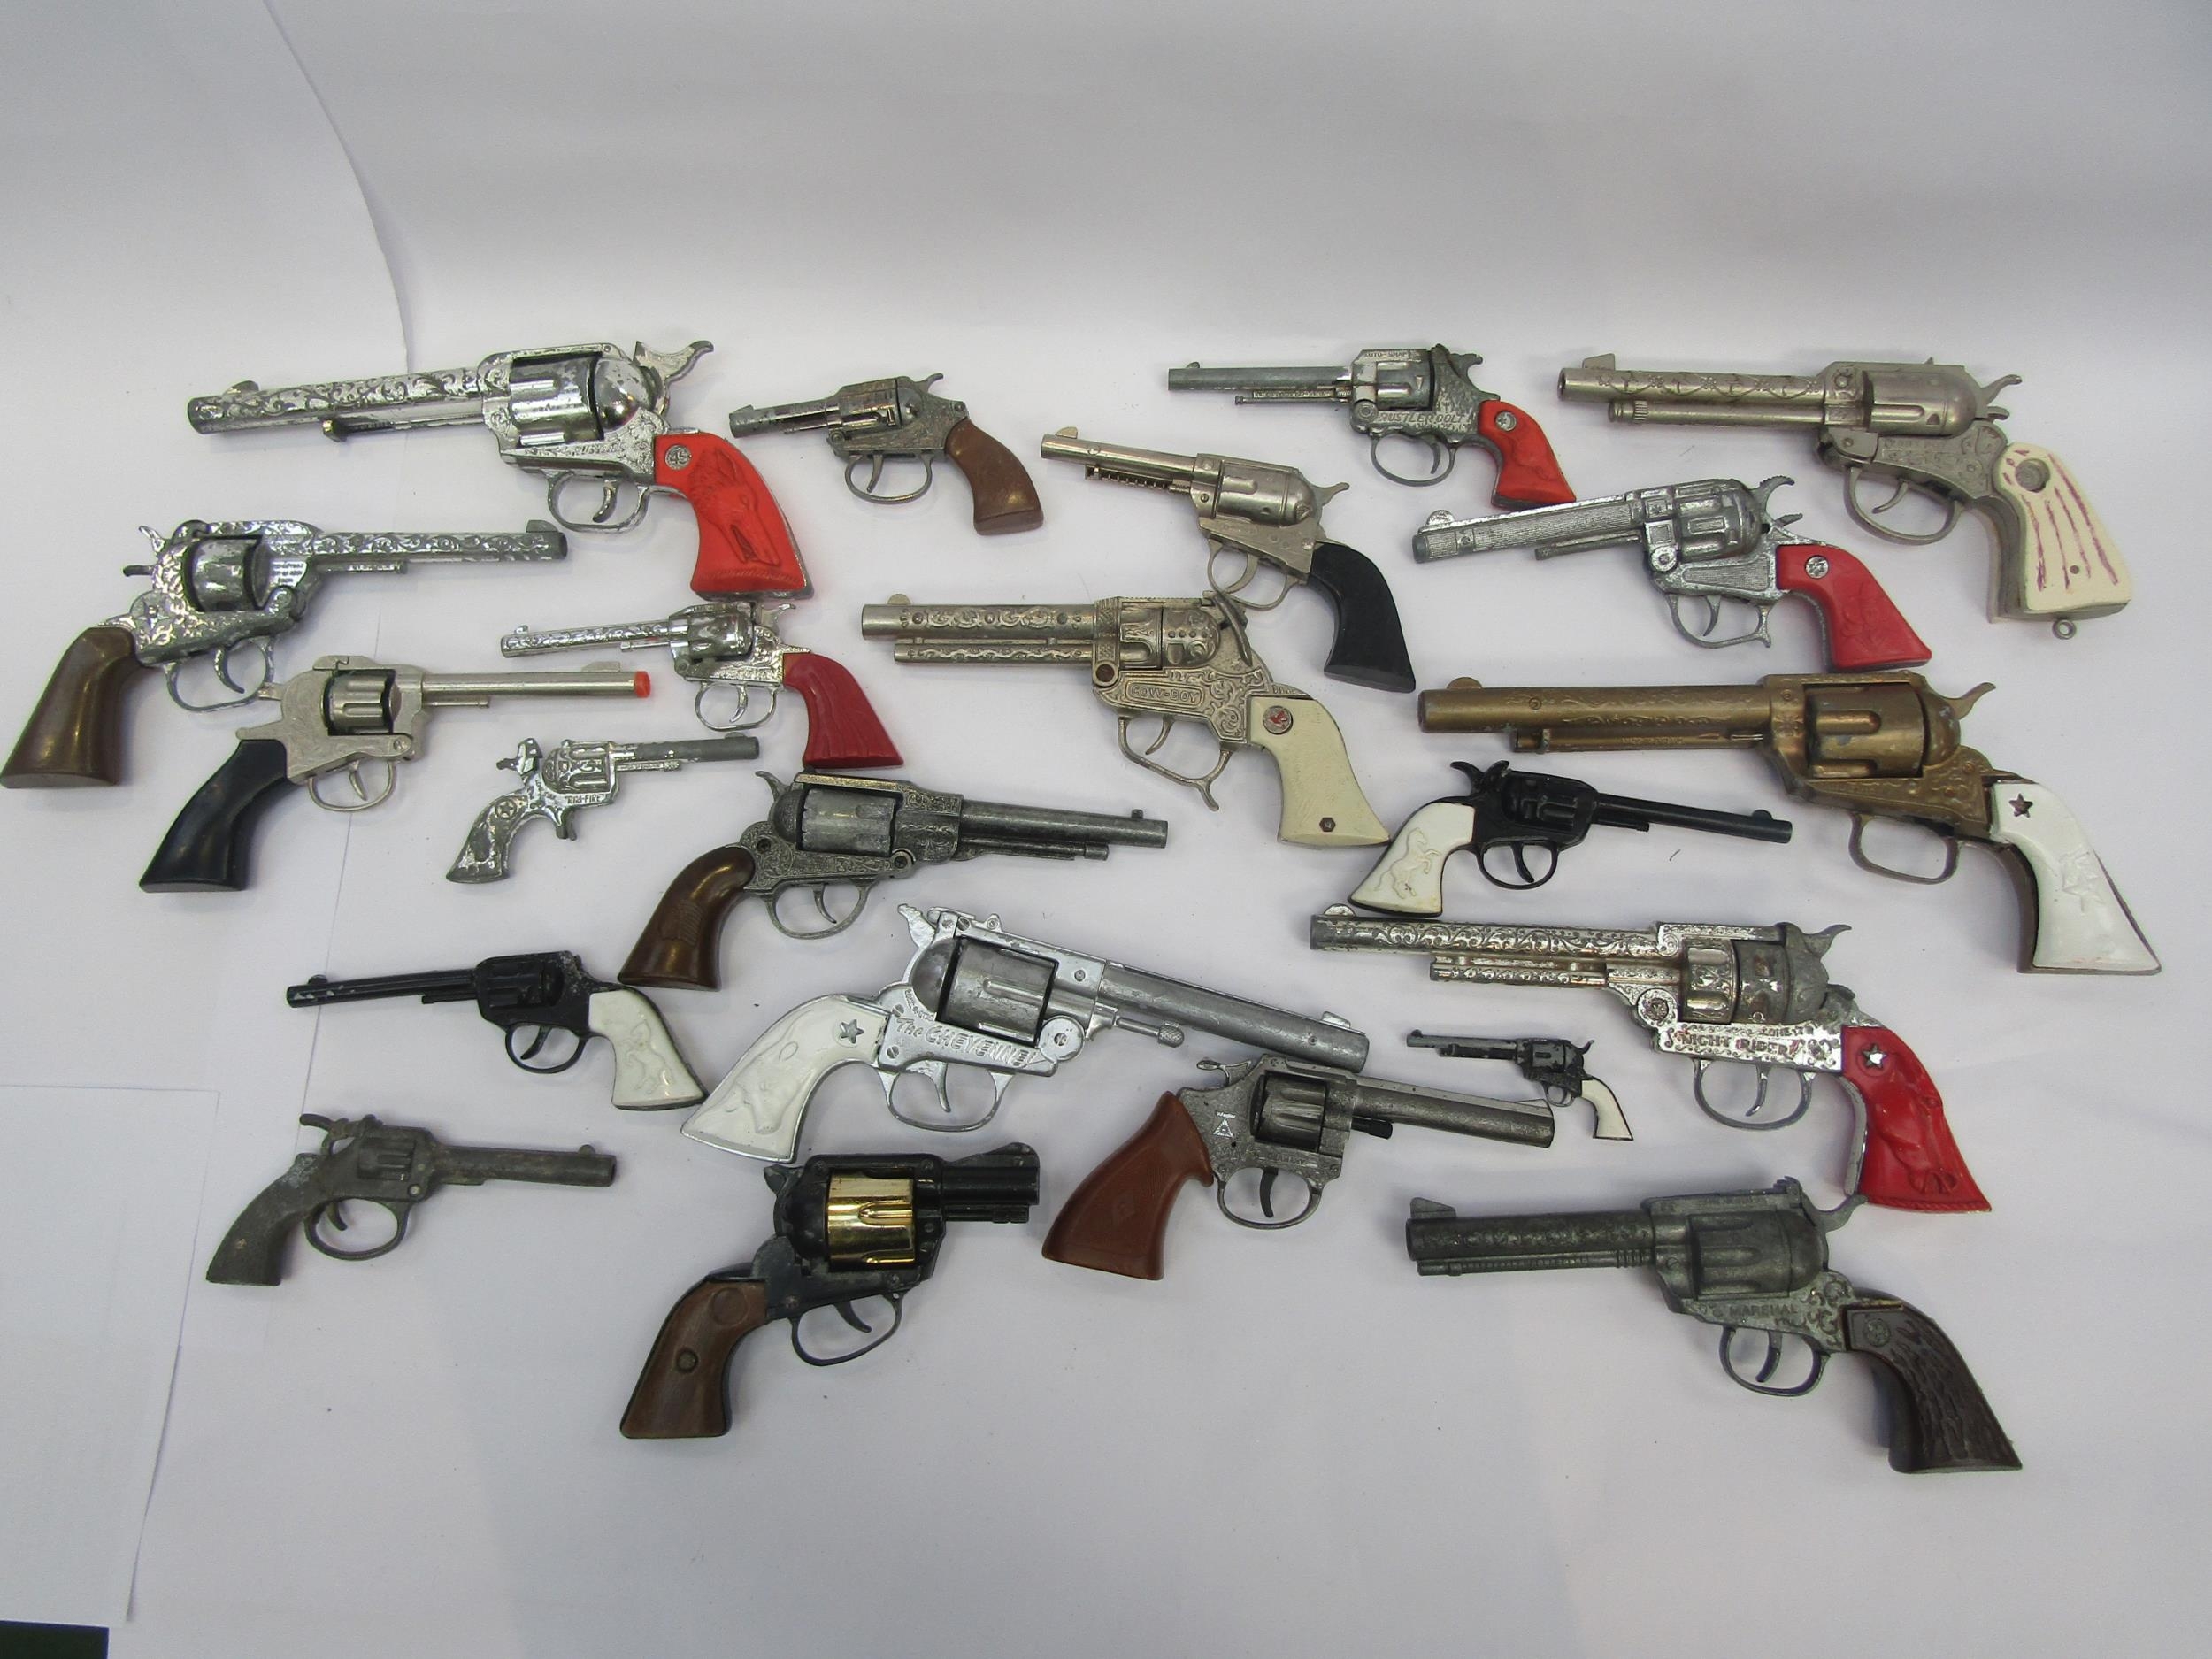 A collection of playworn toy guns, cap guns and pistols including Hubley, Lone Star, Wicke etc